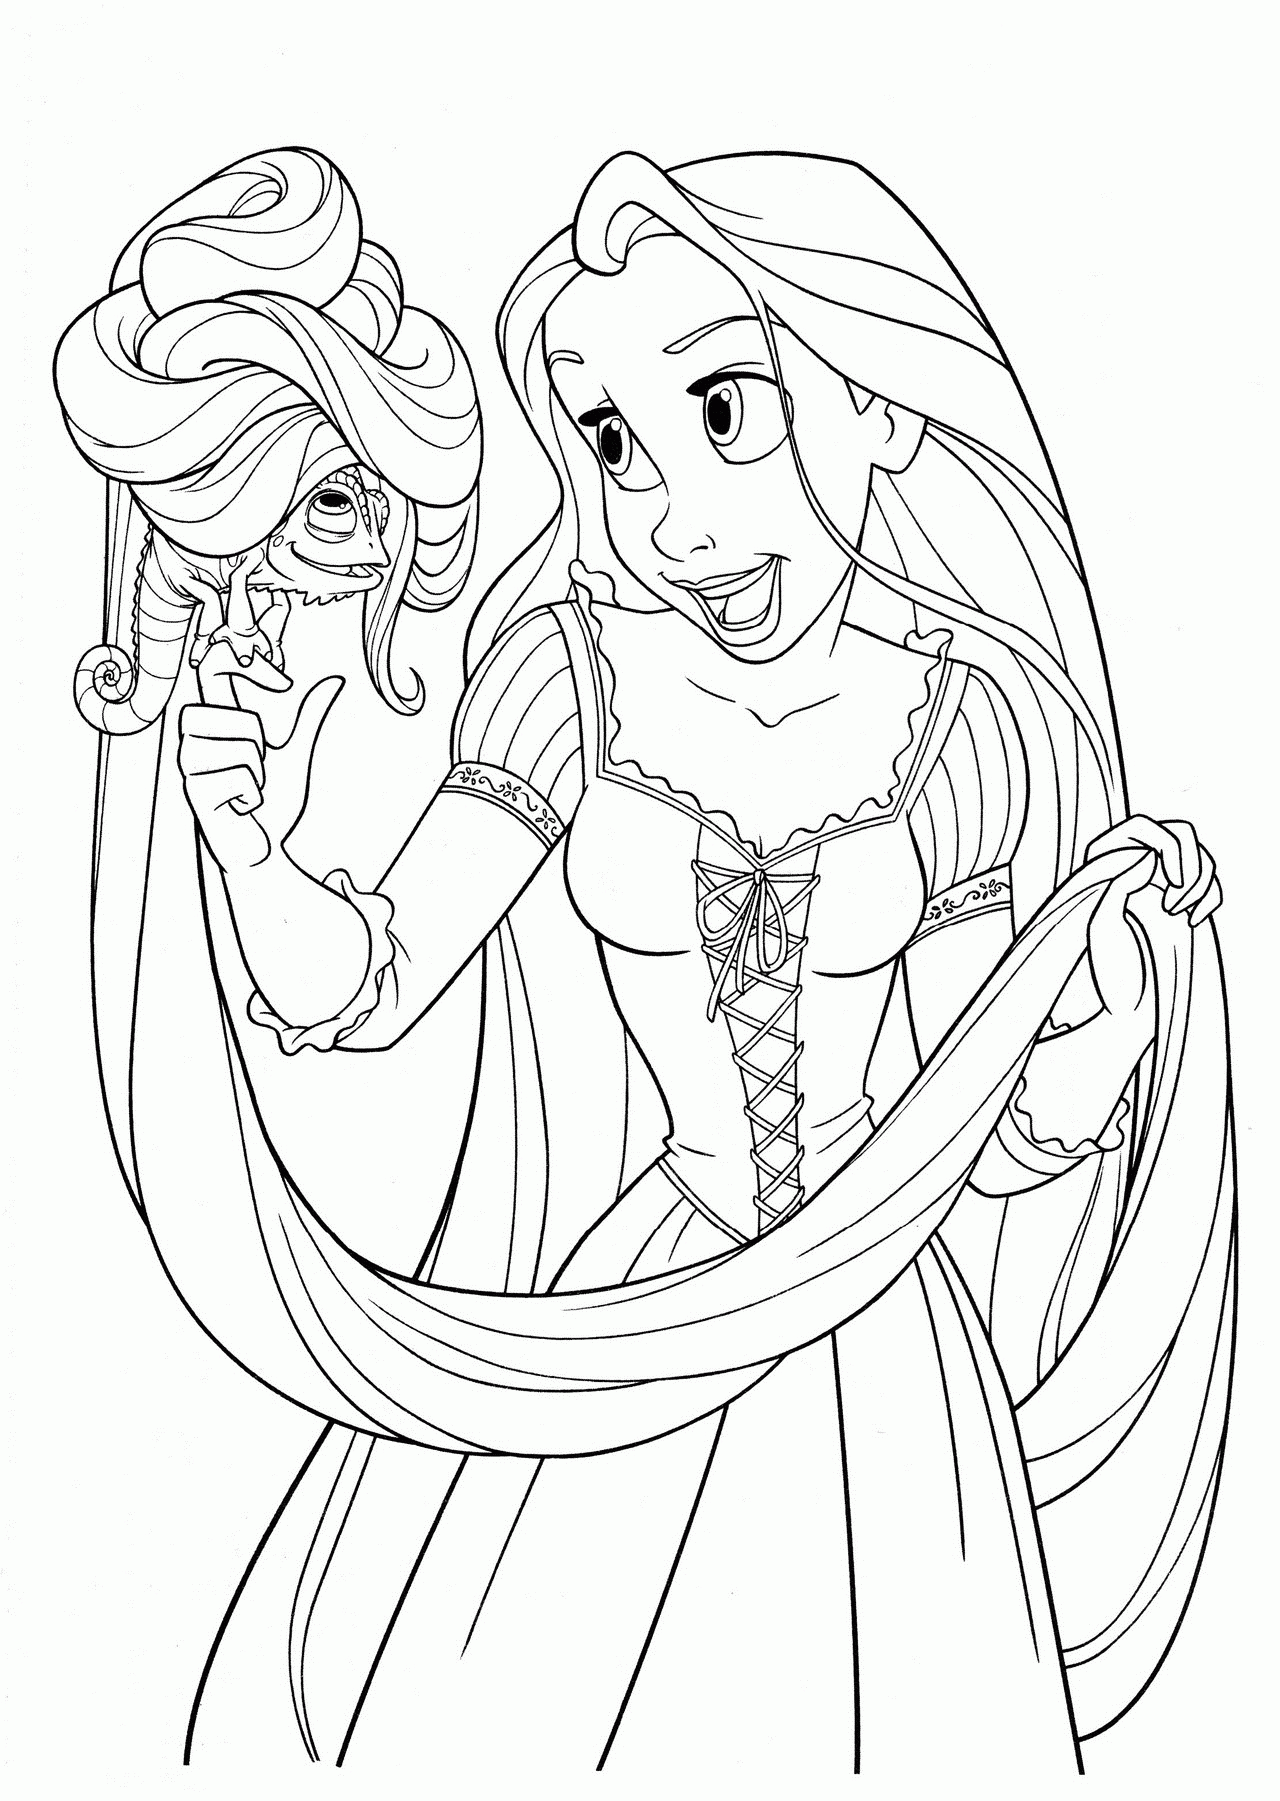 Related Tangled Coloring Pages item-12269, Tangled Coloring Pages ...